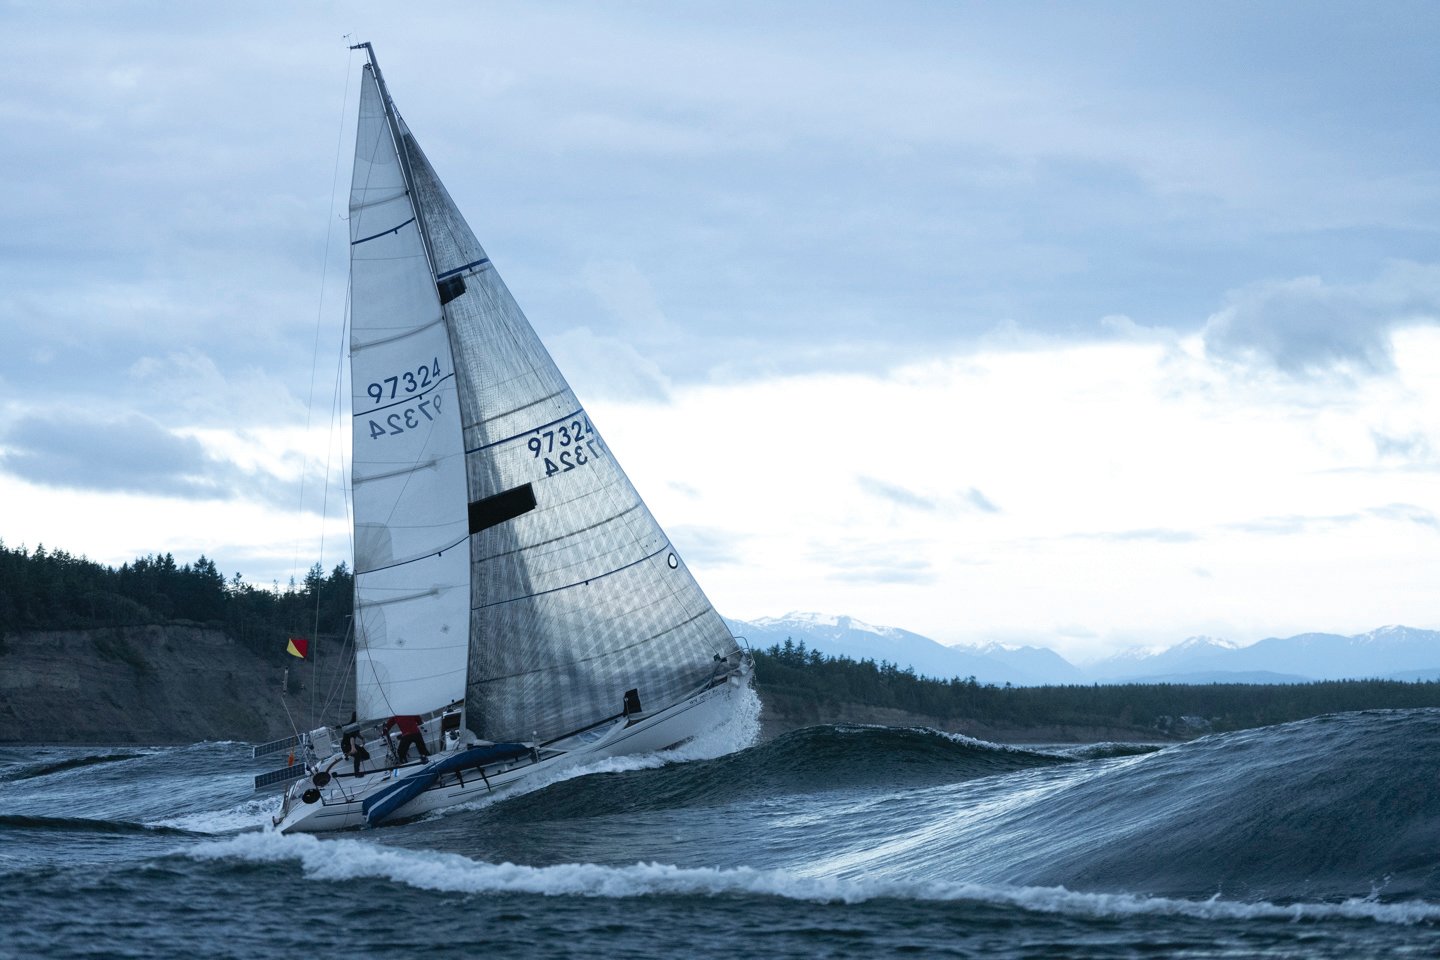 The monohull sailboat of Team Elsewhere pushes past a large wave in the Race to Alaska. The team ended in second place to win a set of steak knives.